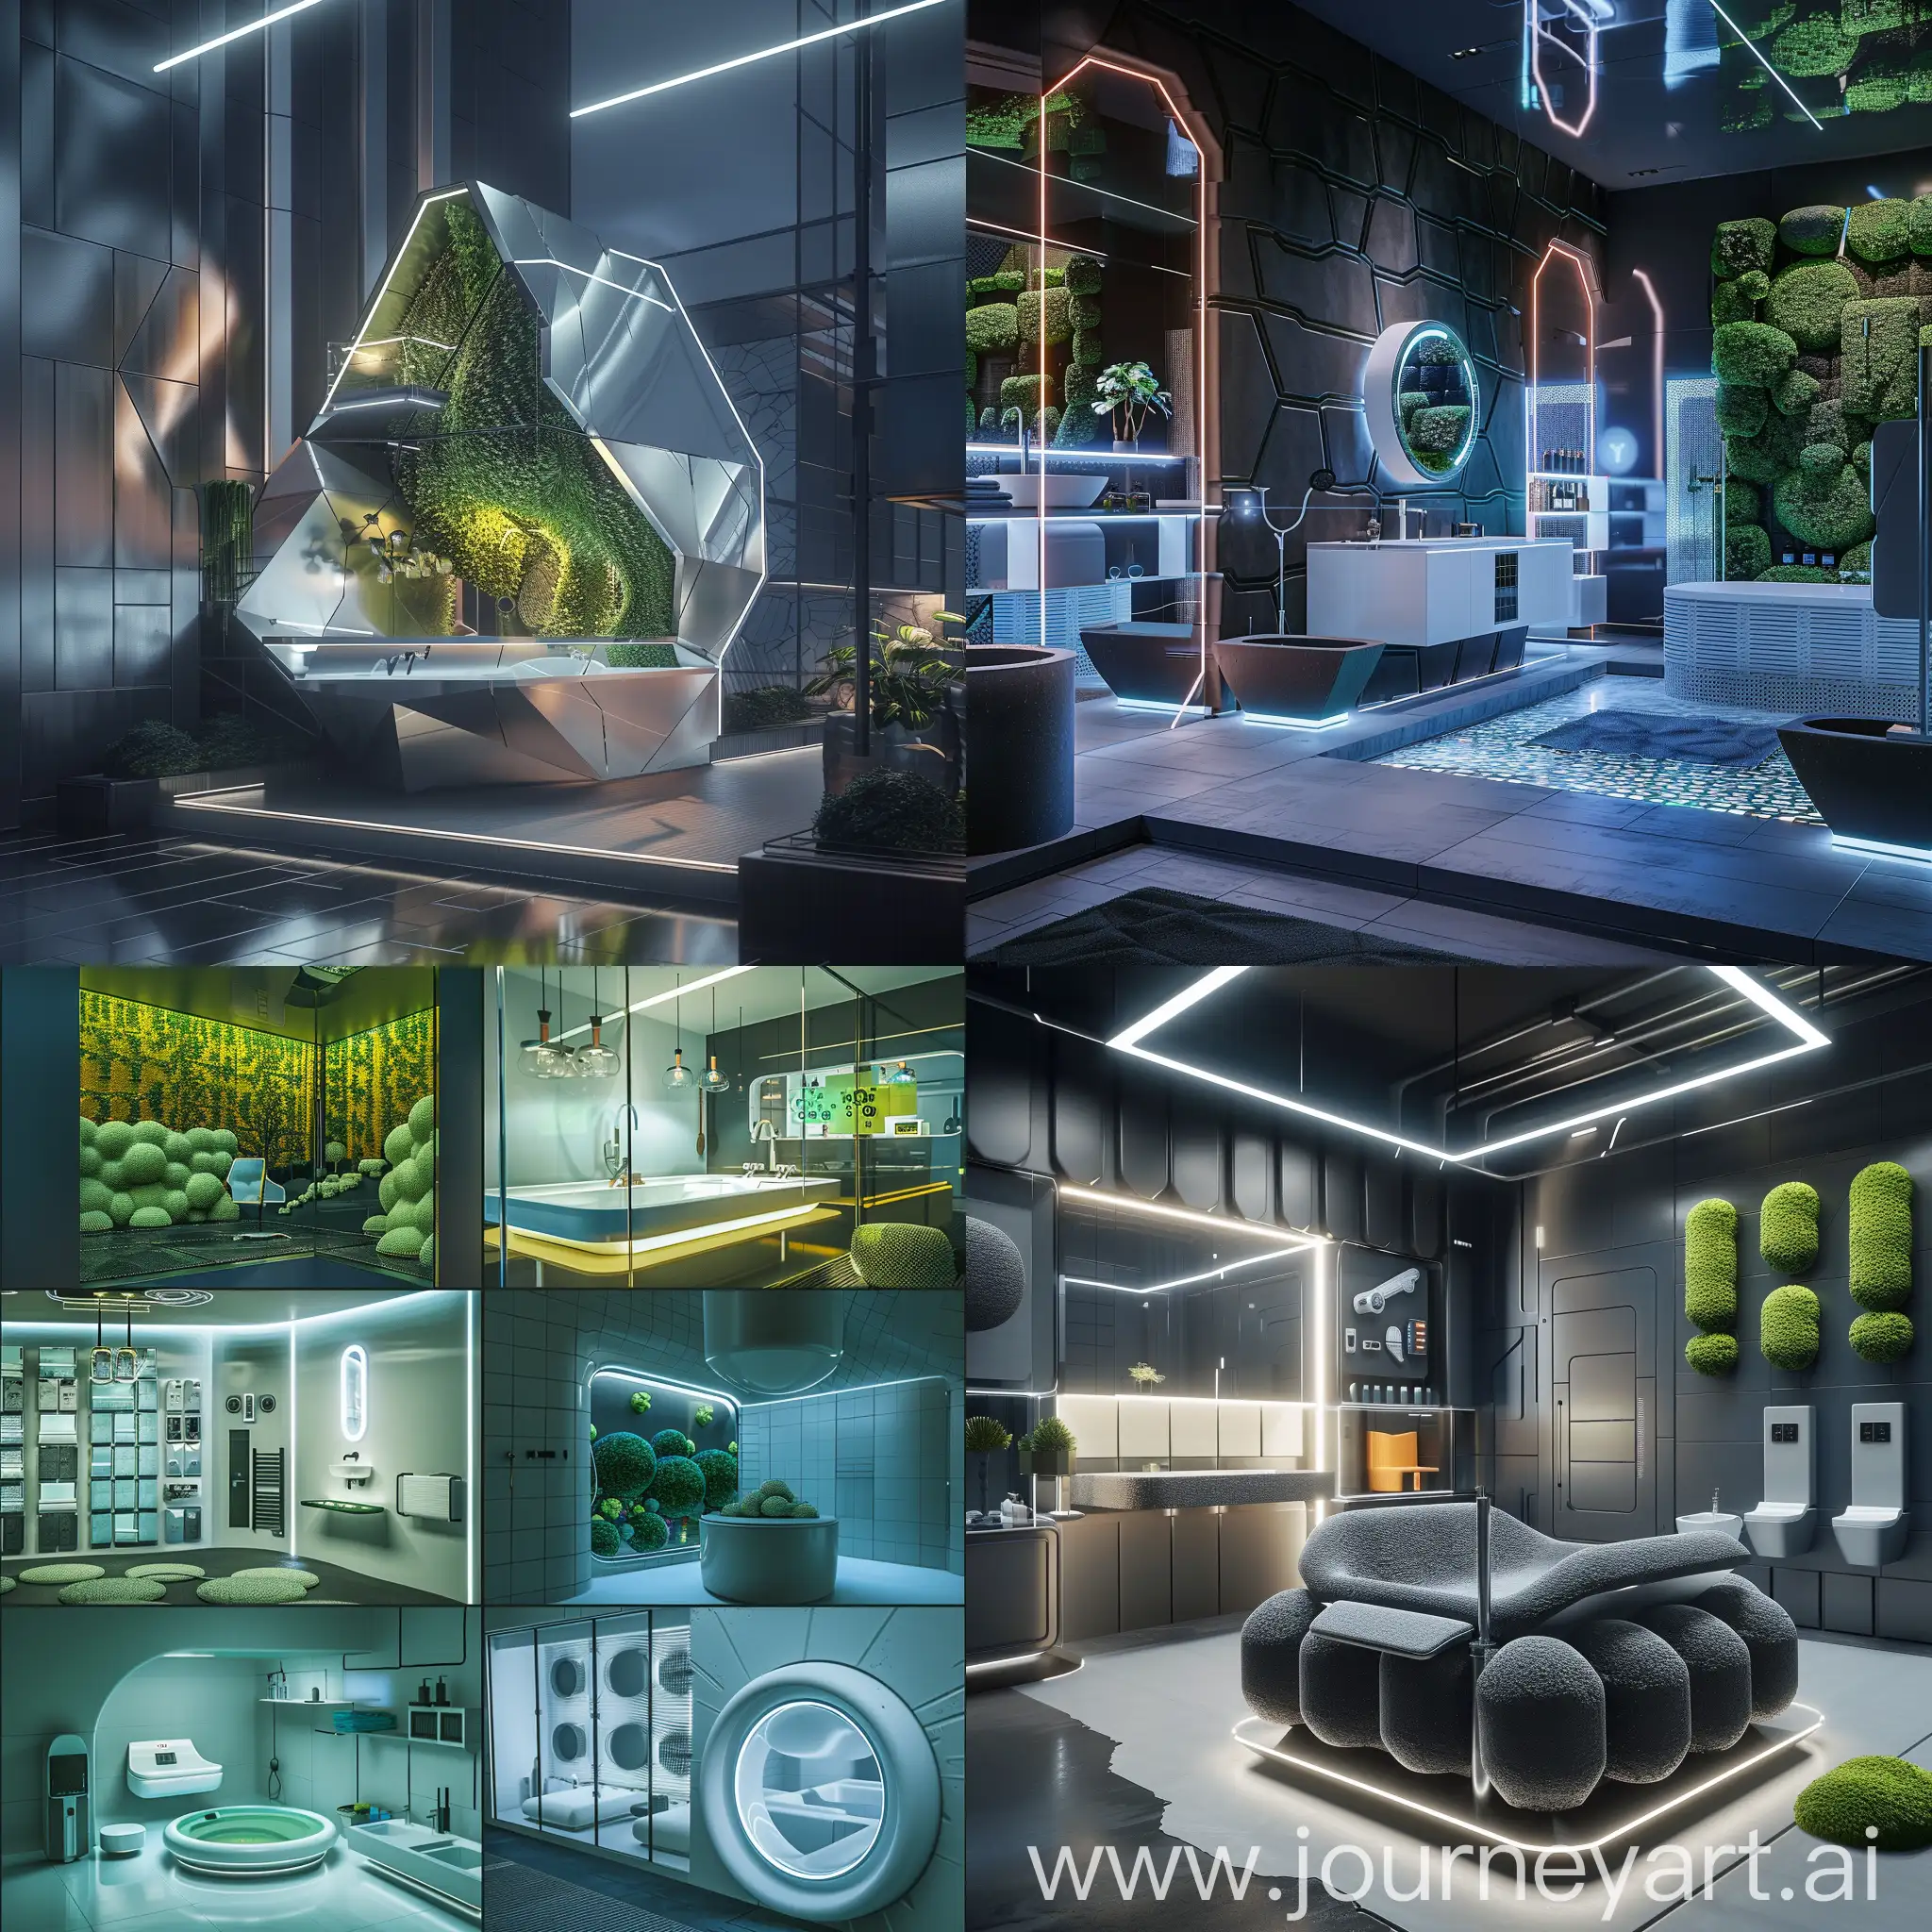 Futuristic-Moscow-Smart-Home-Technology-and-Sustainable-Design-in-a-HighTech-Cityscape